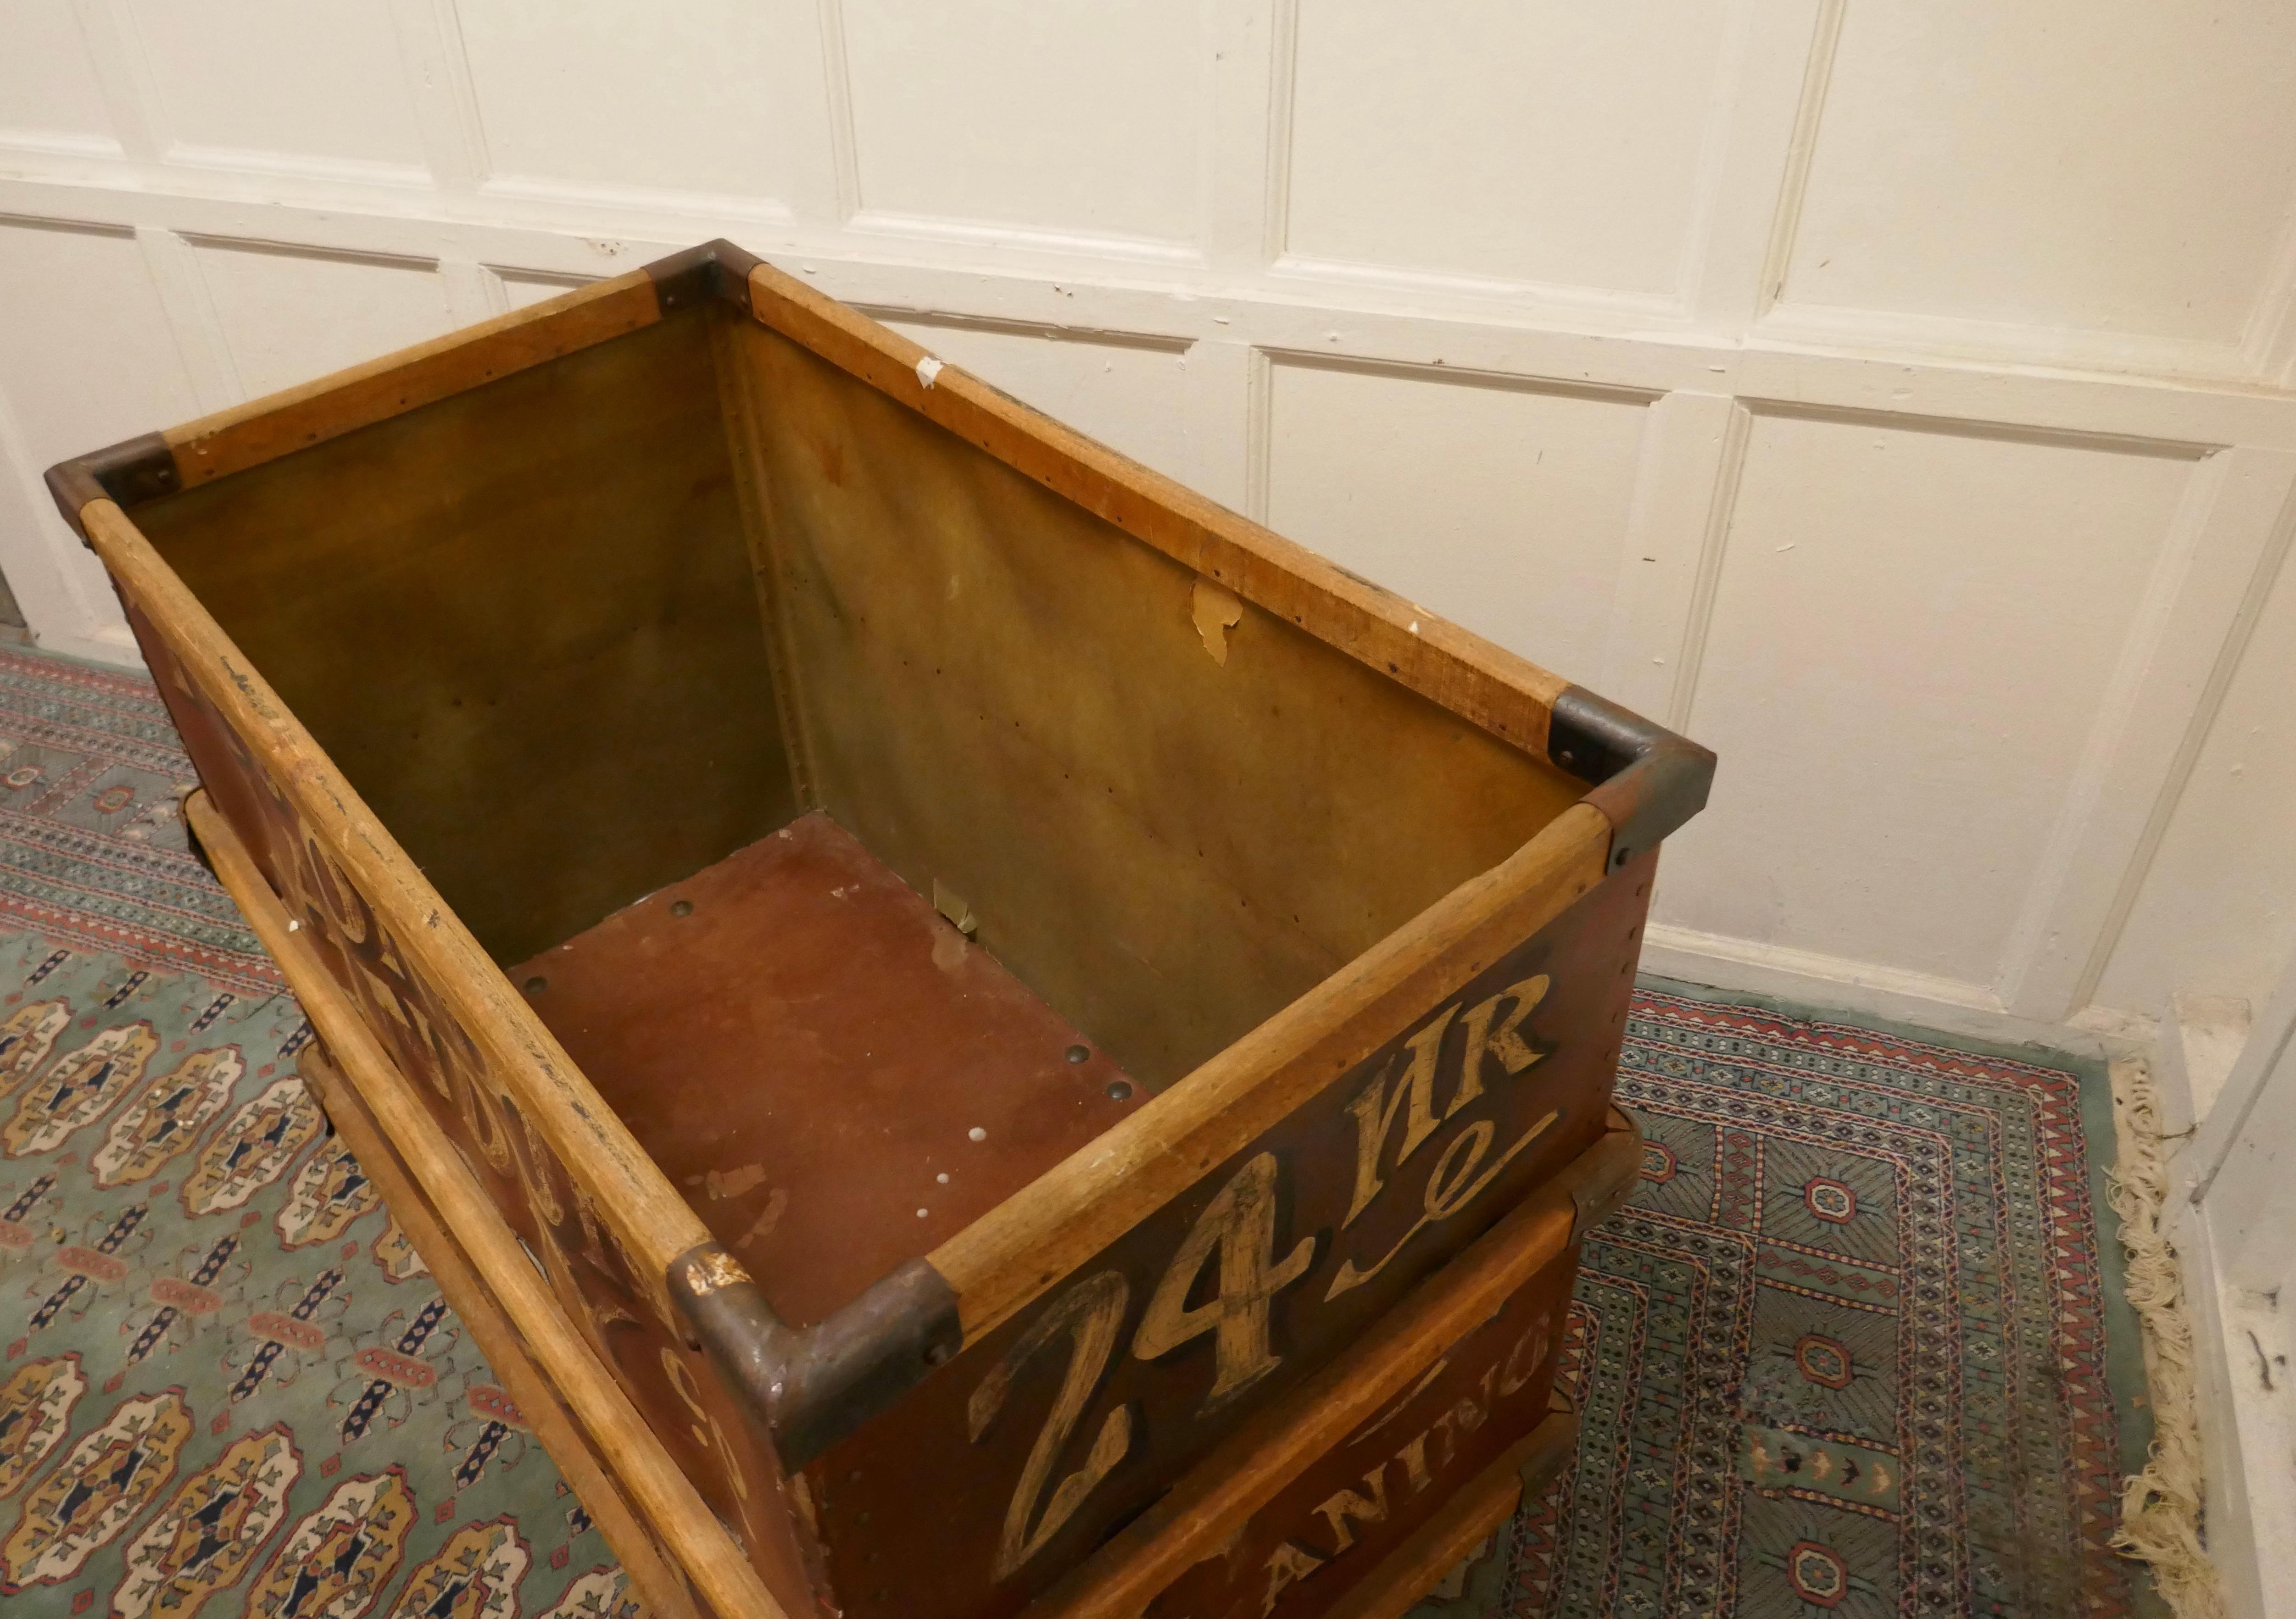 19th Century London Laundry Co. Industrial Trolley Cart   Great piece from the London Laundry For Sale